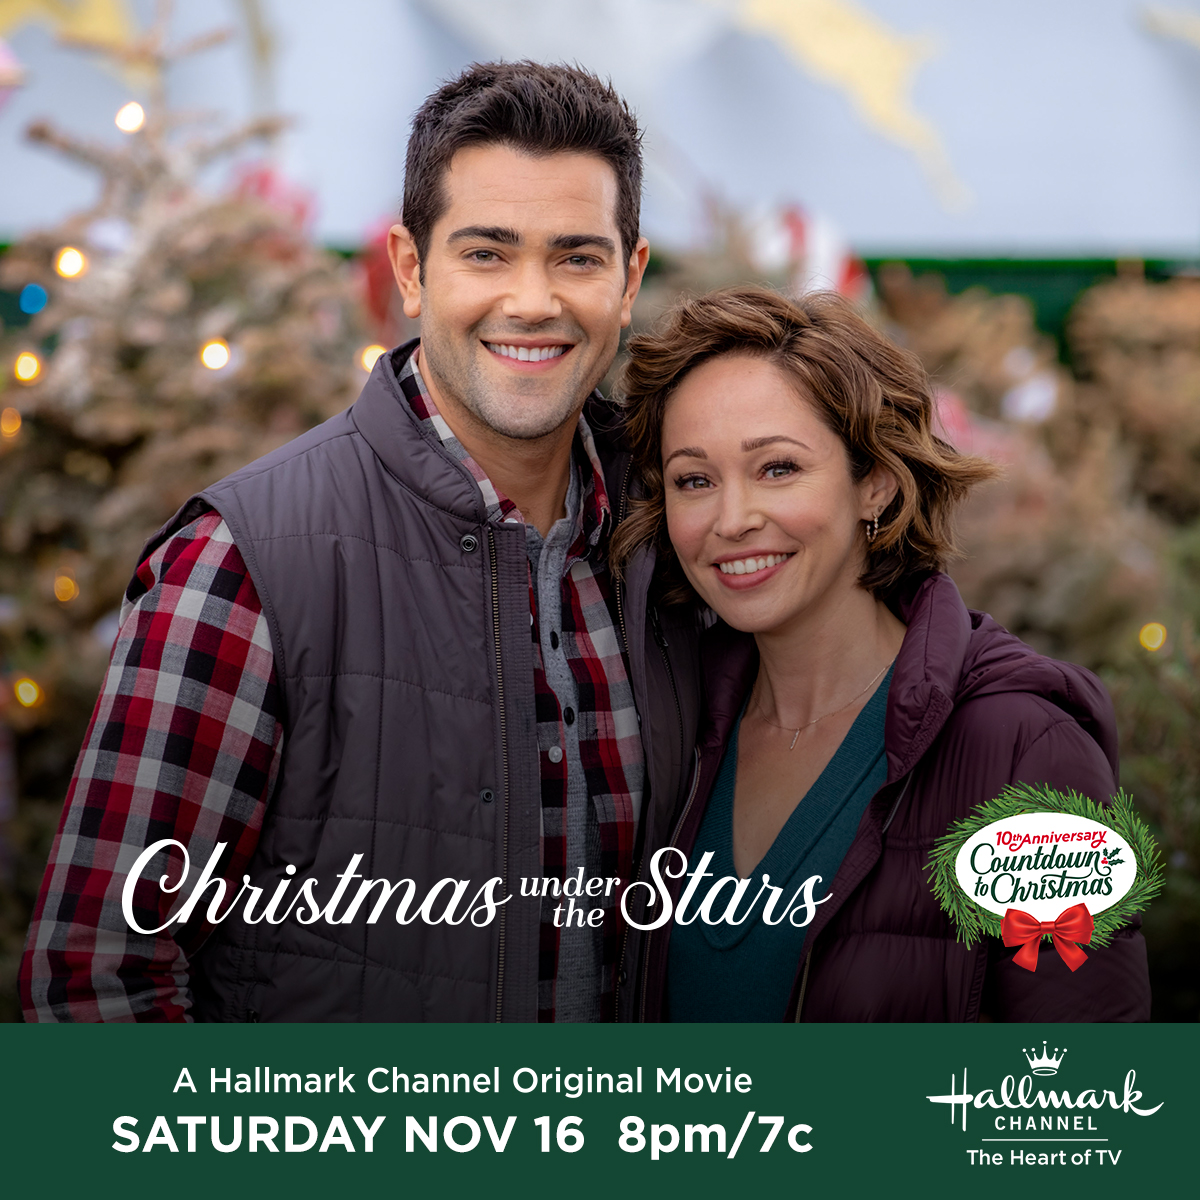 Hallmark Channel's Premiere of "Christmas Under the Stars" on Saturday, Nov. 16th at 8pm/7c! #CountdowntoChristmas